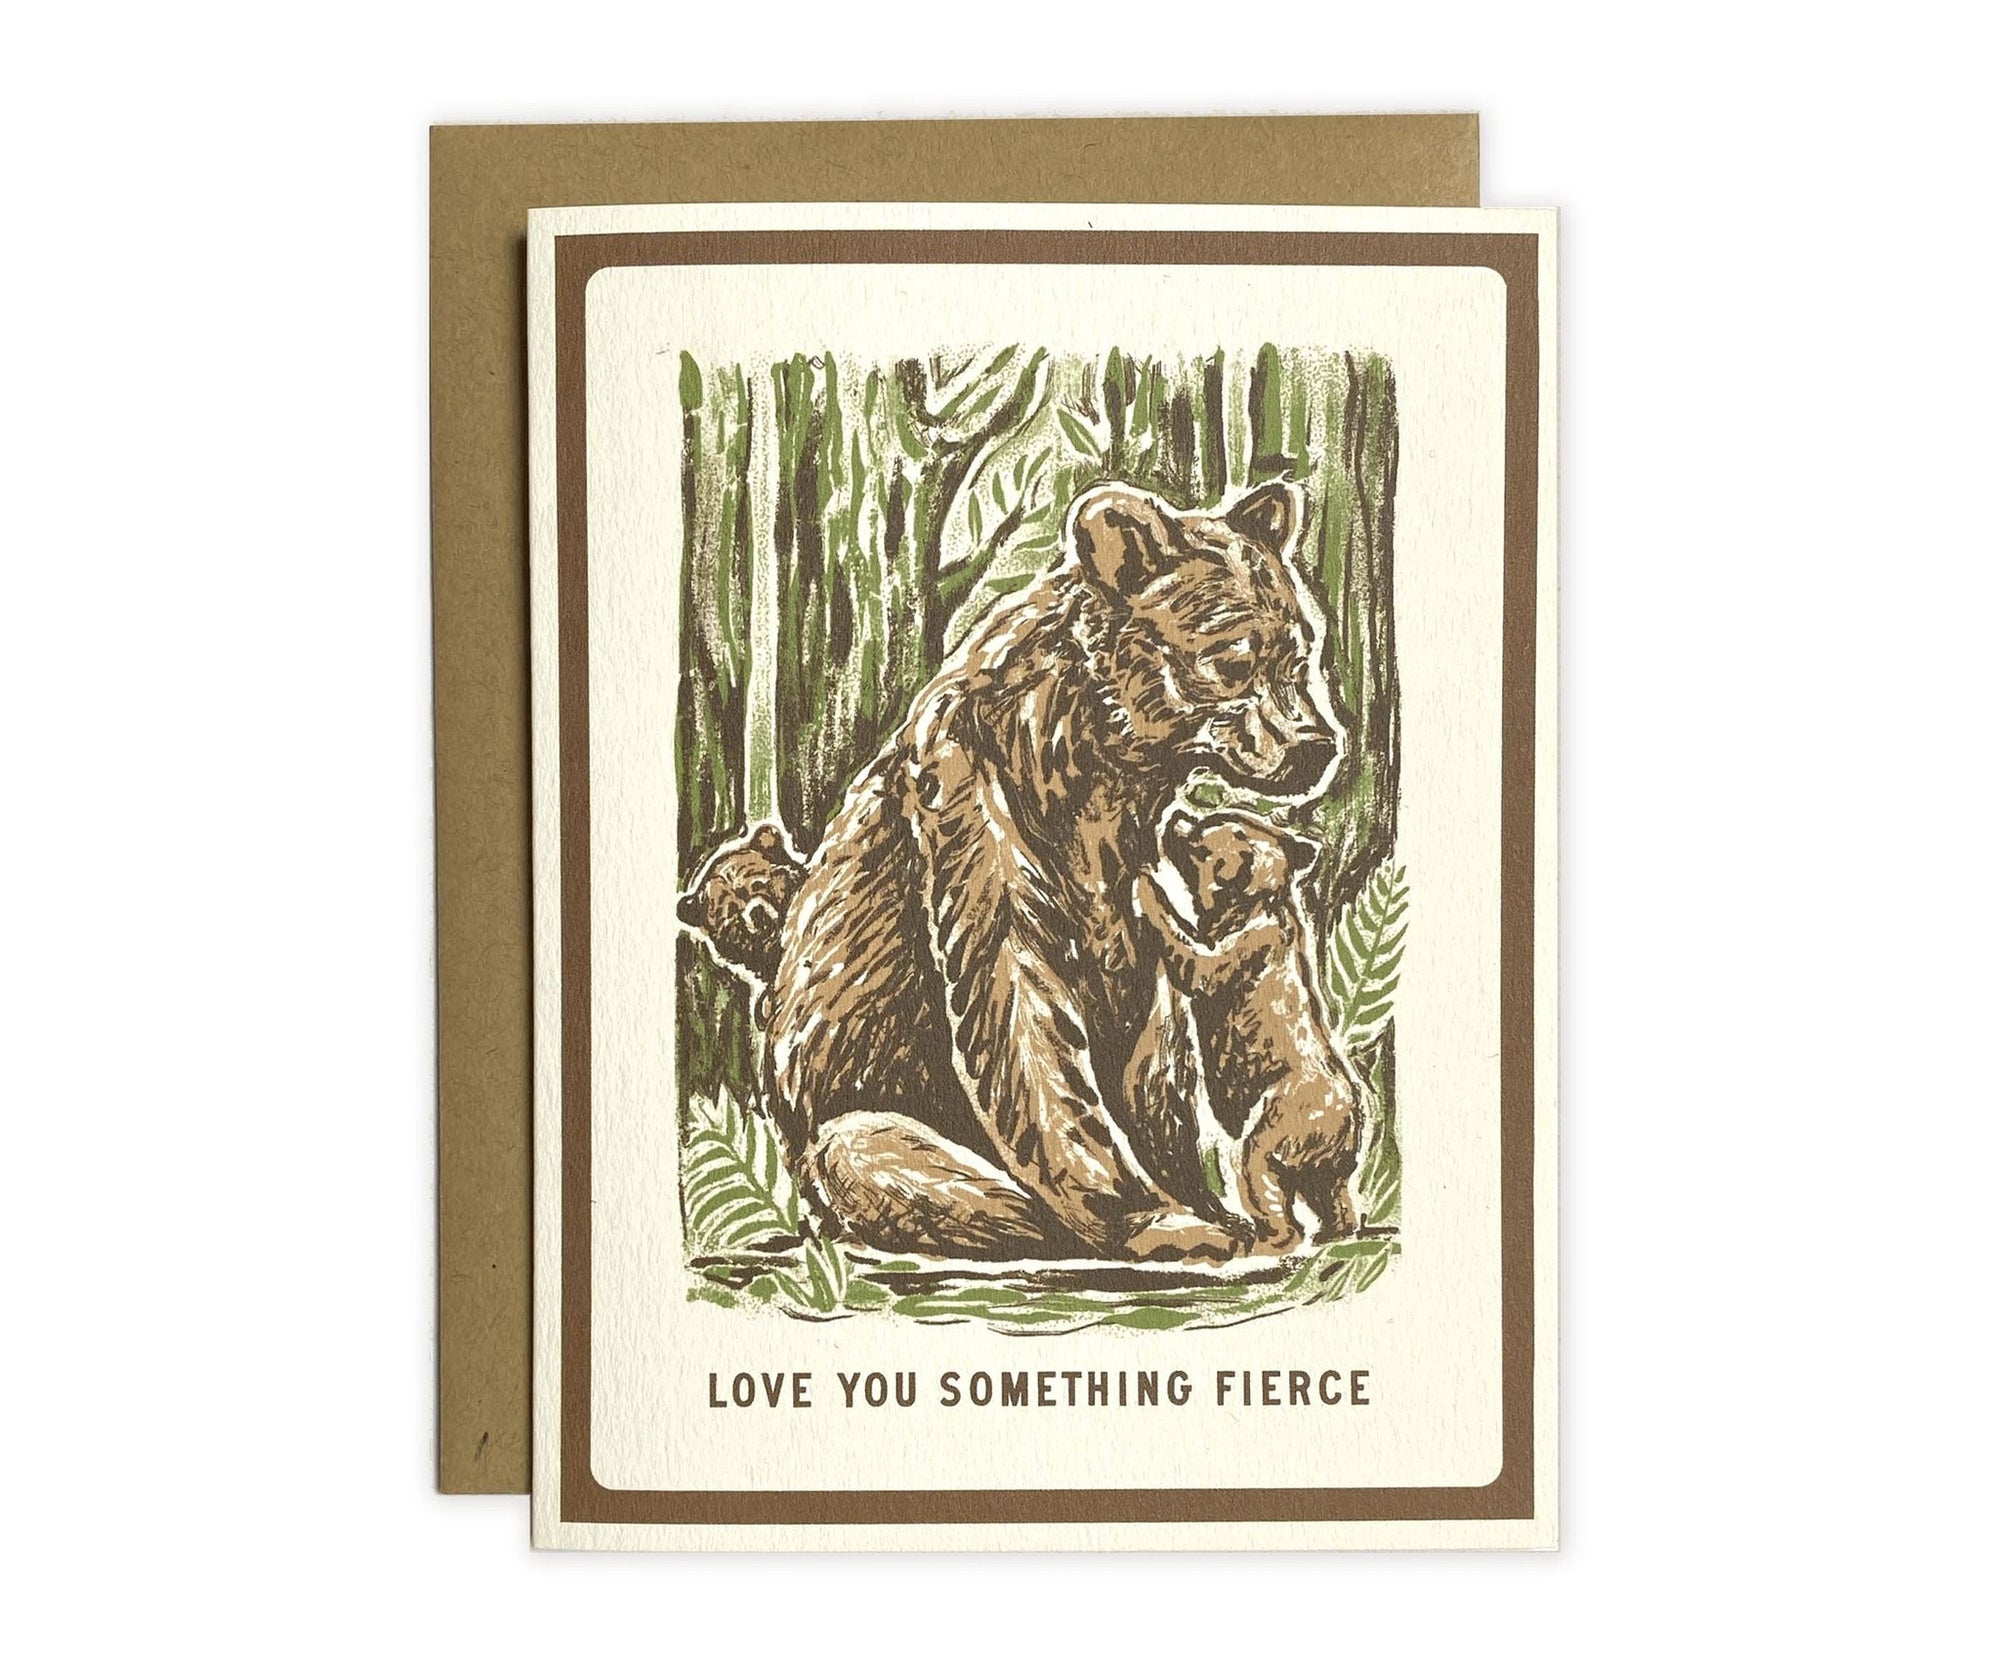 A Mama Bear Love You Something Fierce Greeting Card from The Wild Wander, with an image of a bear and a bear cub.